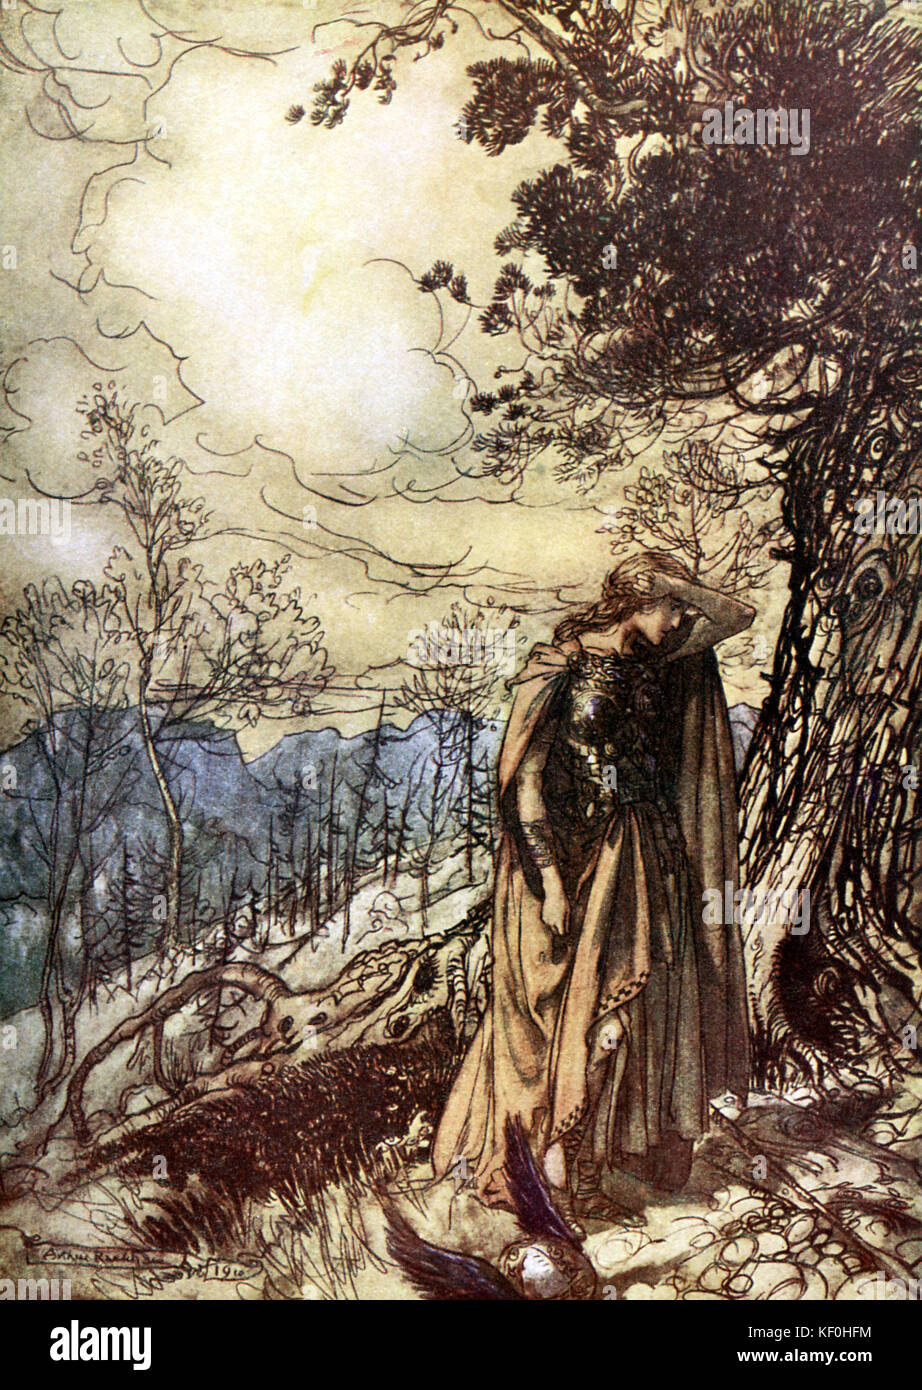 The Valkyrie / Das Walküre by Richard Wagner. The valkyrie Brünnhilde is depressed following a conversation with Wotan, king of the gods.  Illustration by Arthur Rackham 1867 - 1939.  Caption:  'Brünnhilde stands for a long time dazed and alarmed' Act 2.  From 'The Ring Cycle' / 'Der Ring des Nibelungen'.  RW German composer & author, 22 May 1813 - 13 February 1883. Stock Photo